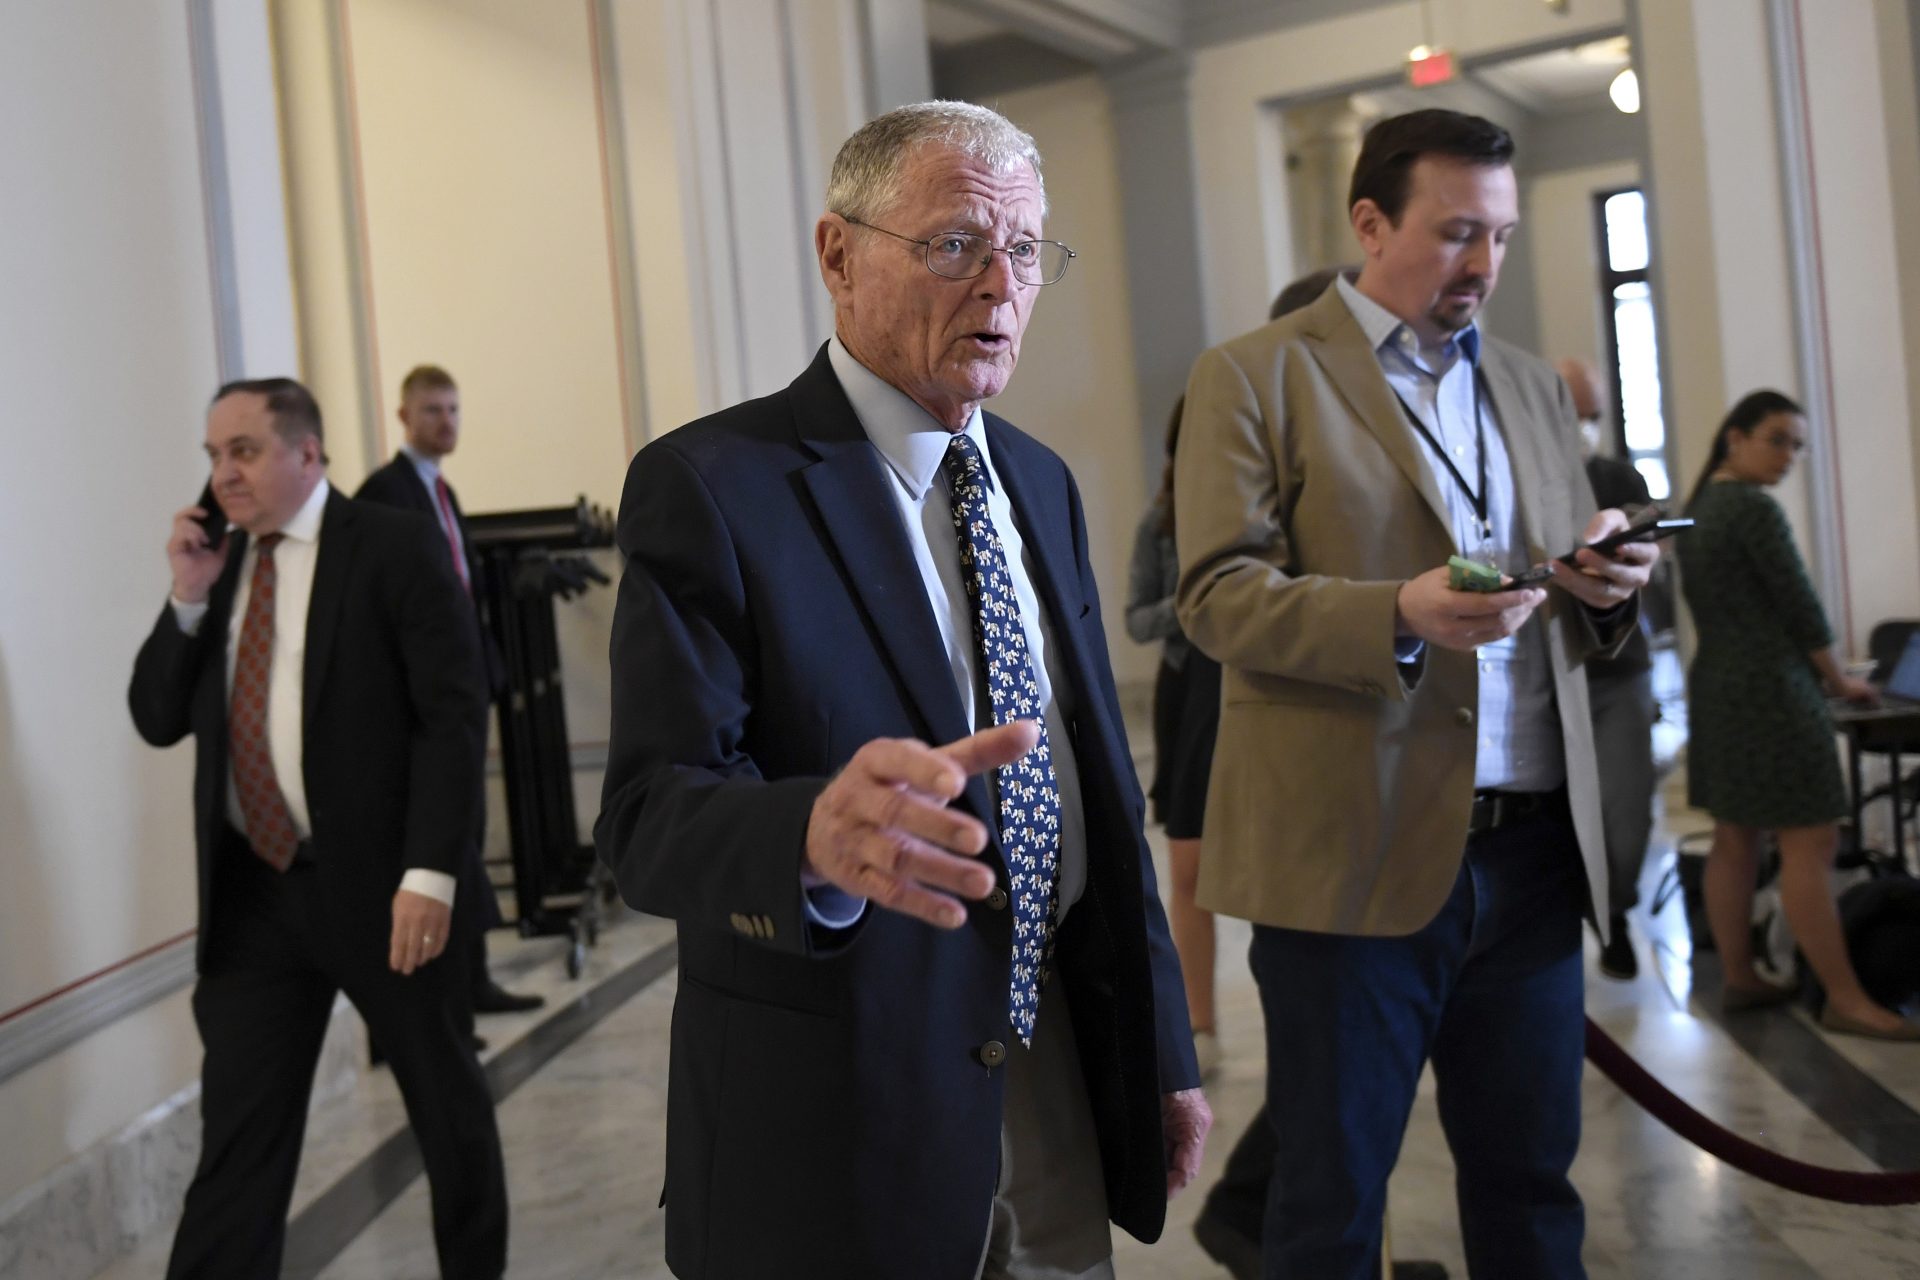 Sen. Jim Inhofe, R-Okla., talks to reporters before attending a Republican policy lunch on Capitol Hill in Washington, Friday, March 20, 2020.